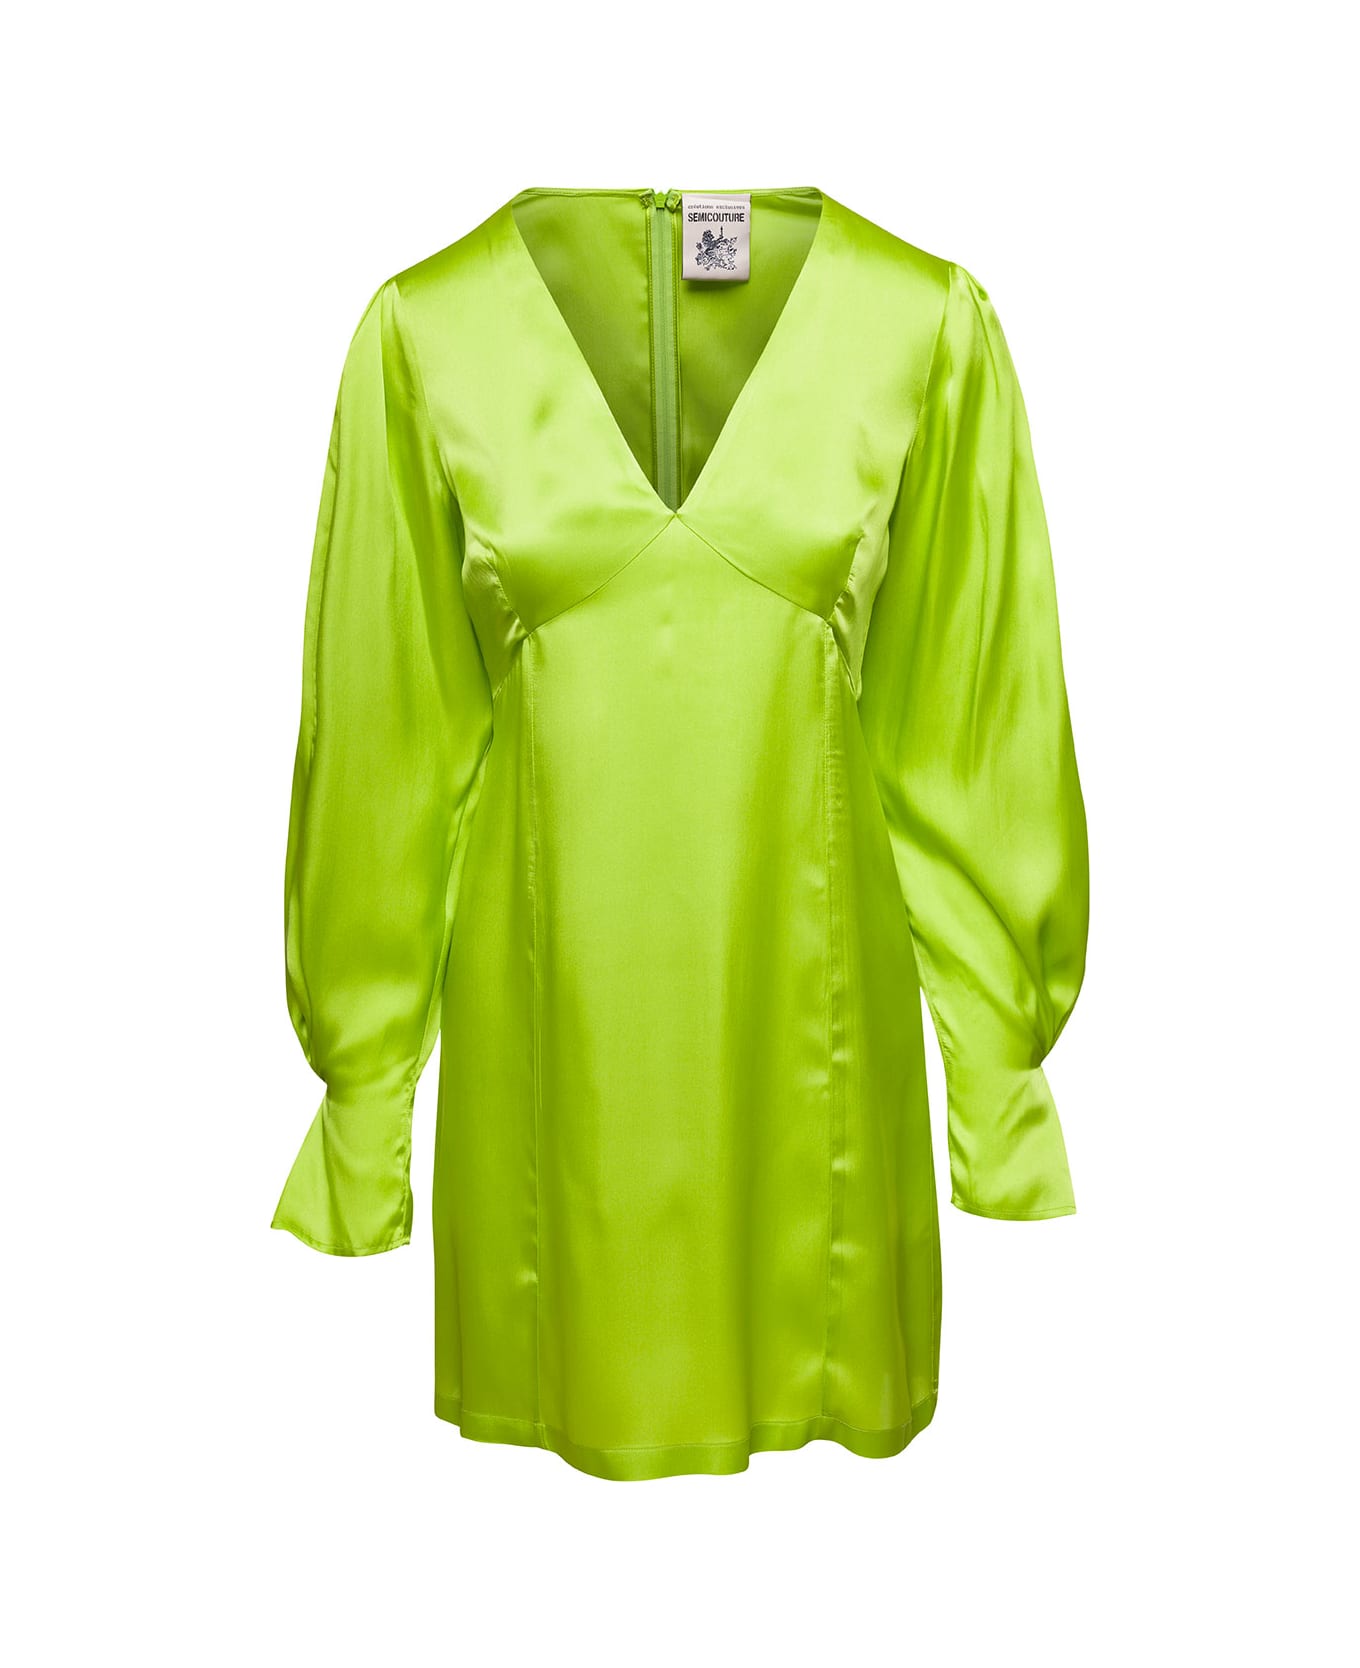 SEMICOUTURE Lime Green Zoie Minidress V Neck Satin Effect In Silk Blend Woman - Green